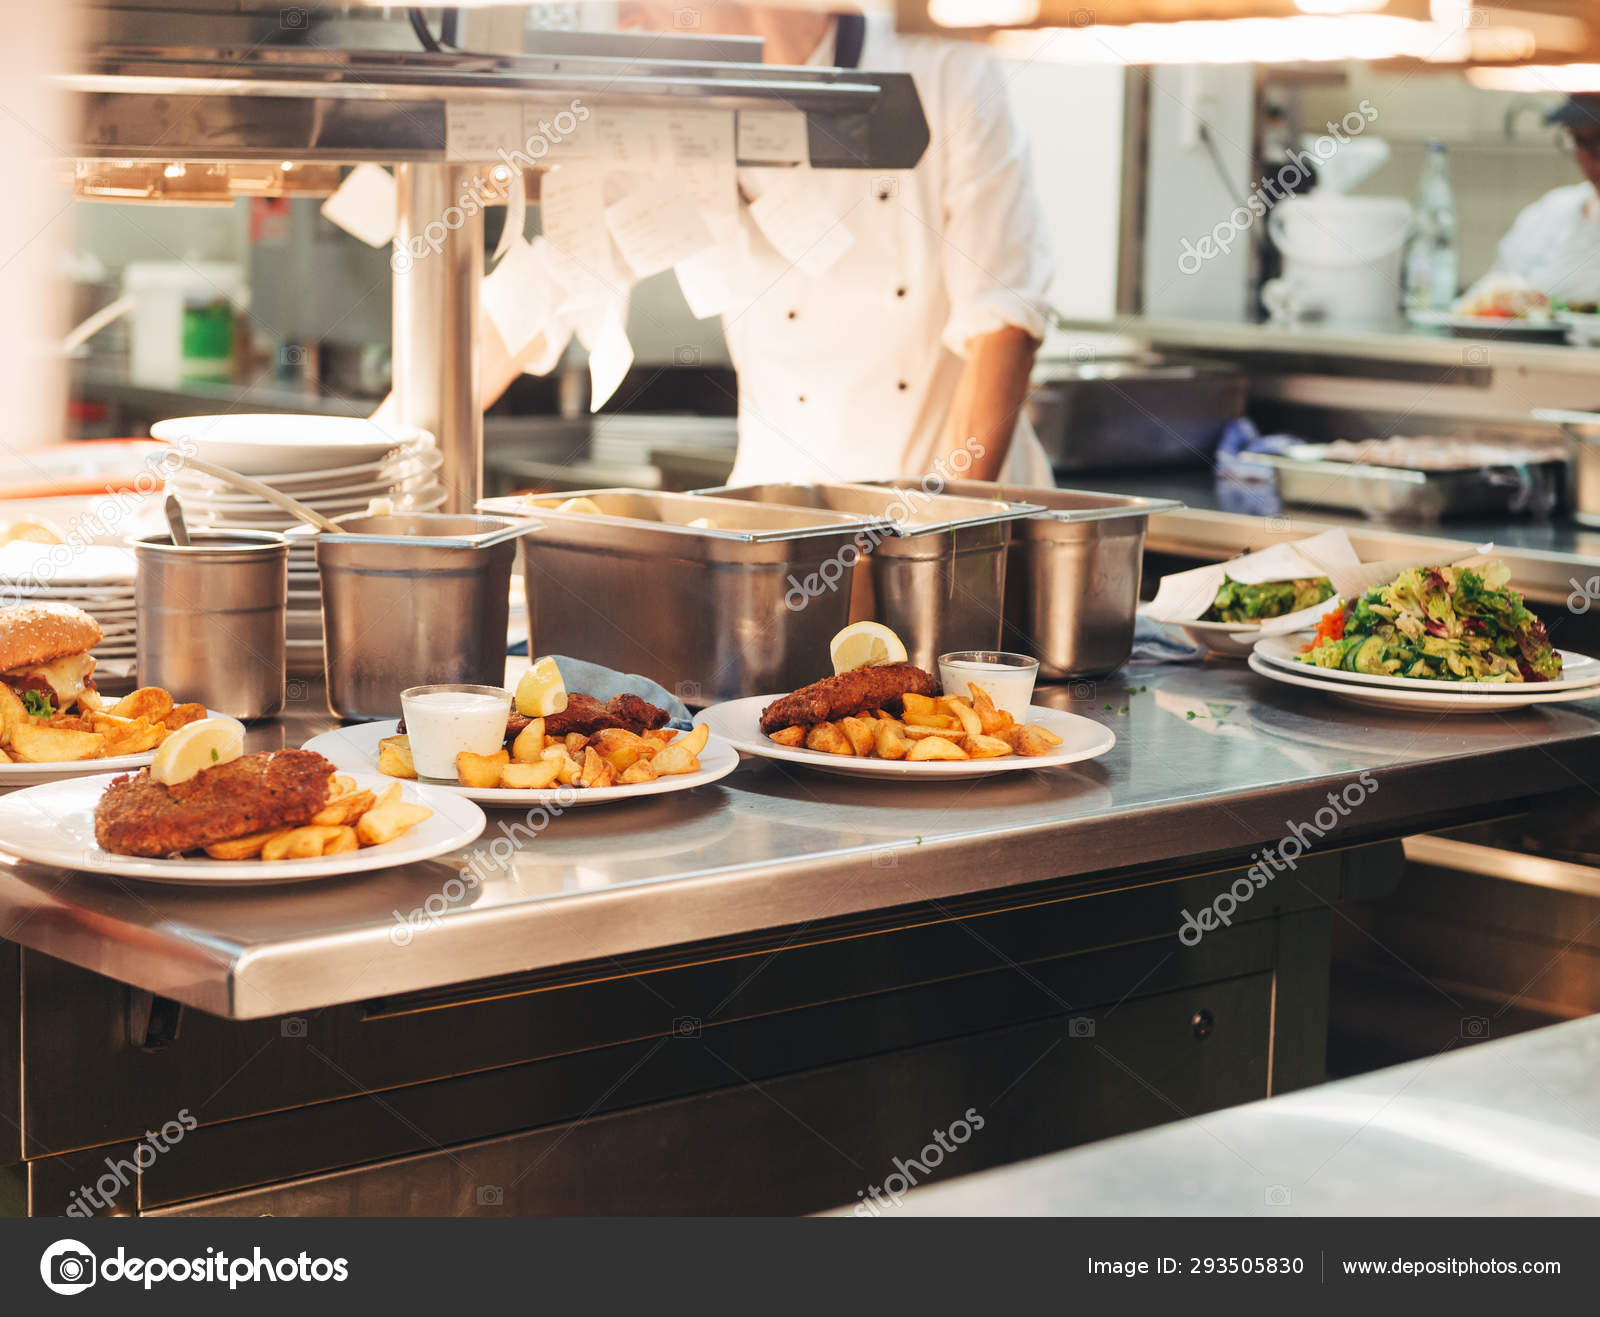 Food Orders Kitchen Table Restaurant Chief Decorating Schnitzel Fried Potatoes Stock Photo Annanahabed 293505830